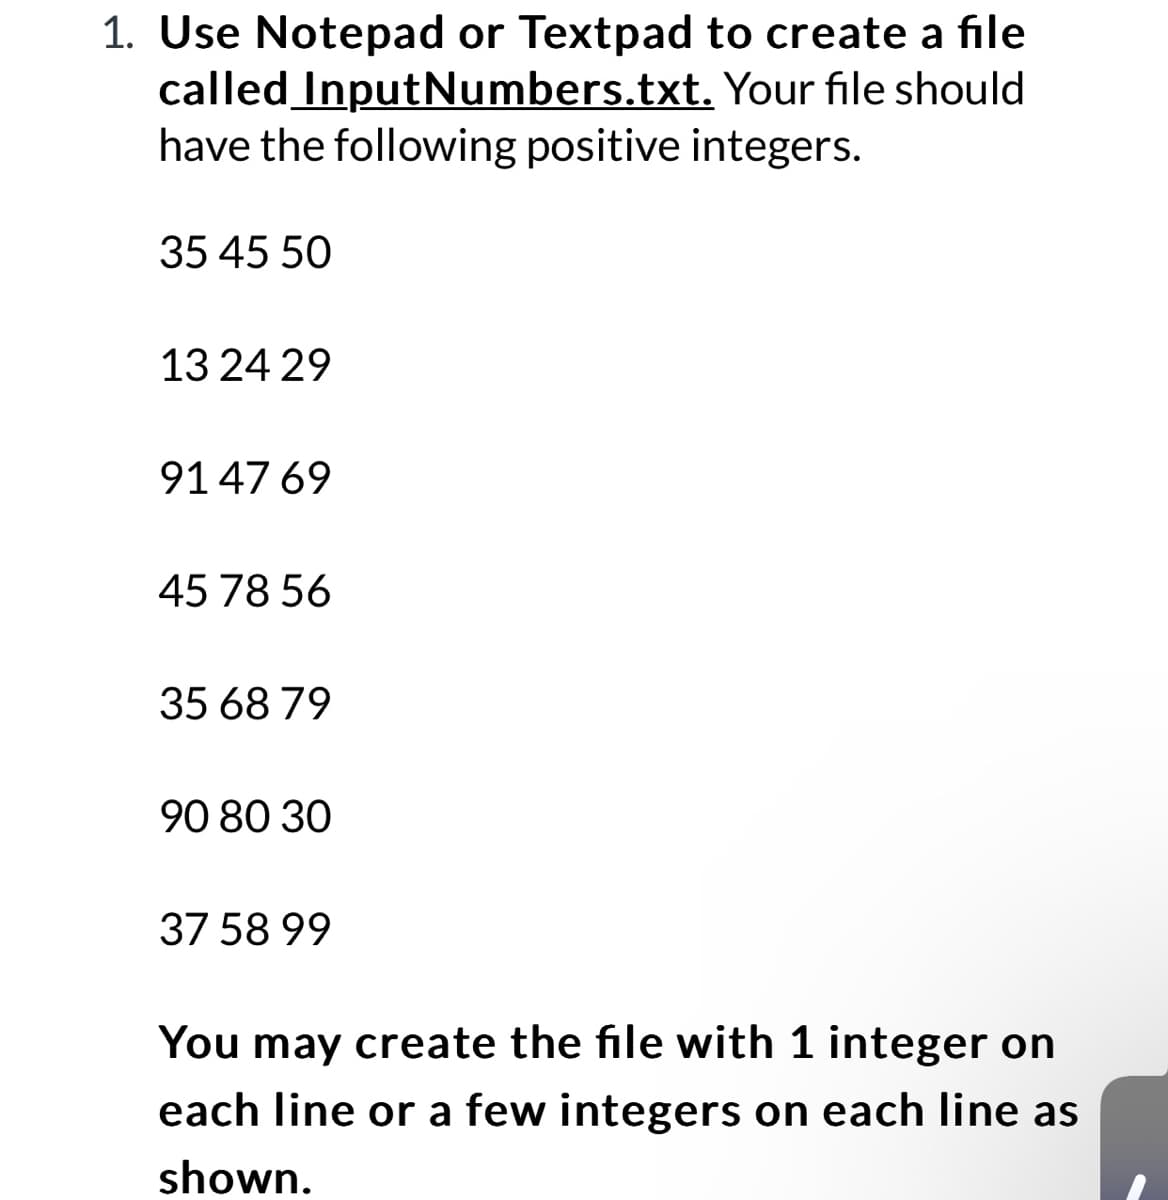 1. Use Notepad or Textpad to create a file
InputNumbers.txt. Your file should
called
have the following positive integers.
35 45 50
13 24 29
9147 69
45 78 56
35 68 79
90 80 30
37 58 99
You may create the file with 1 integer on
each line or a few integers on each line as
shown.